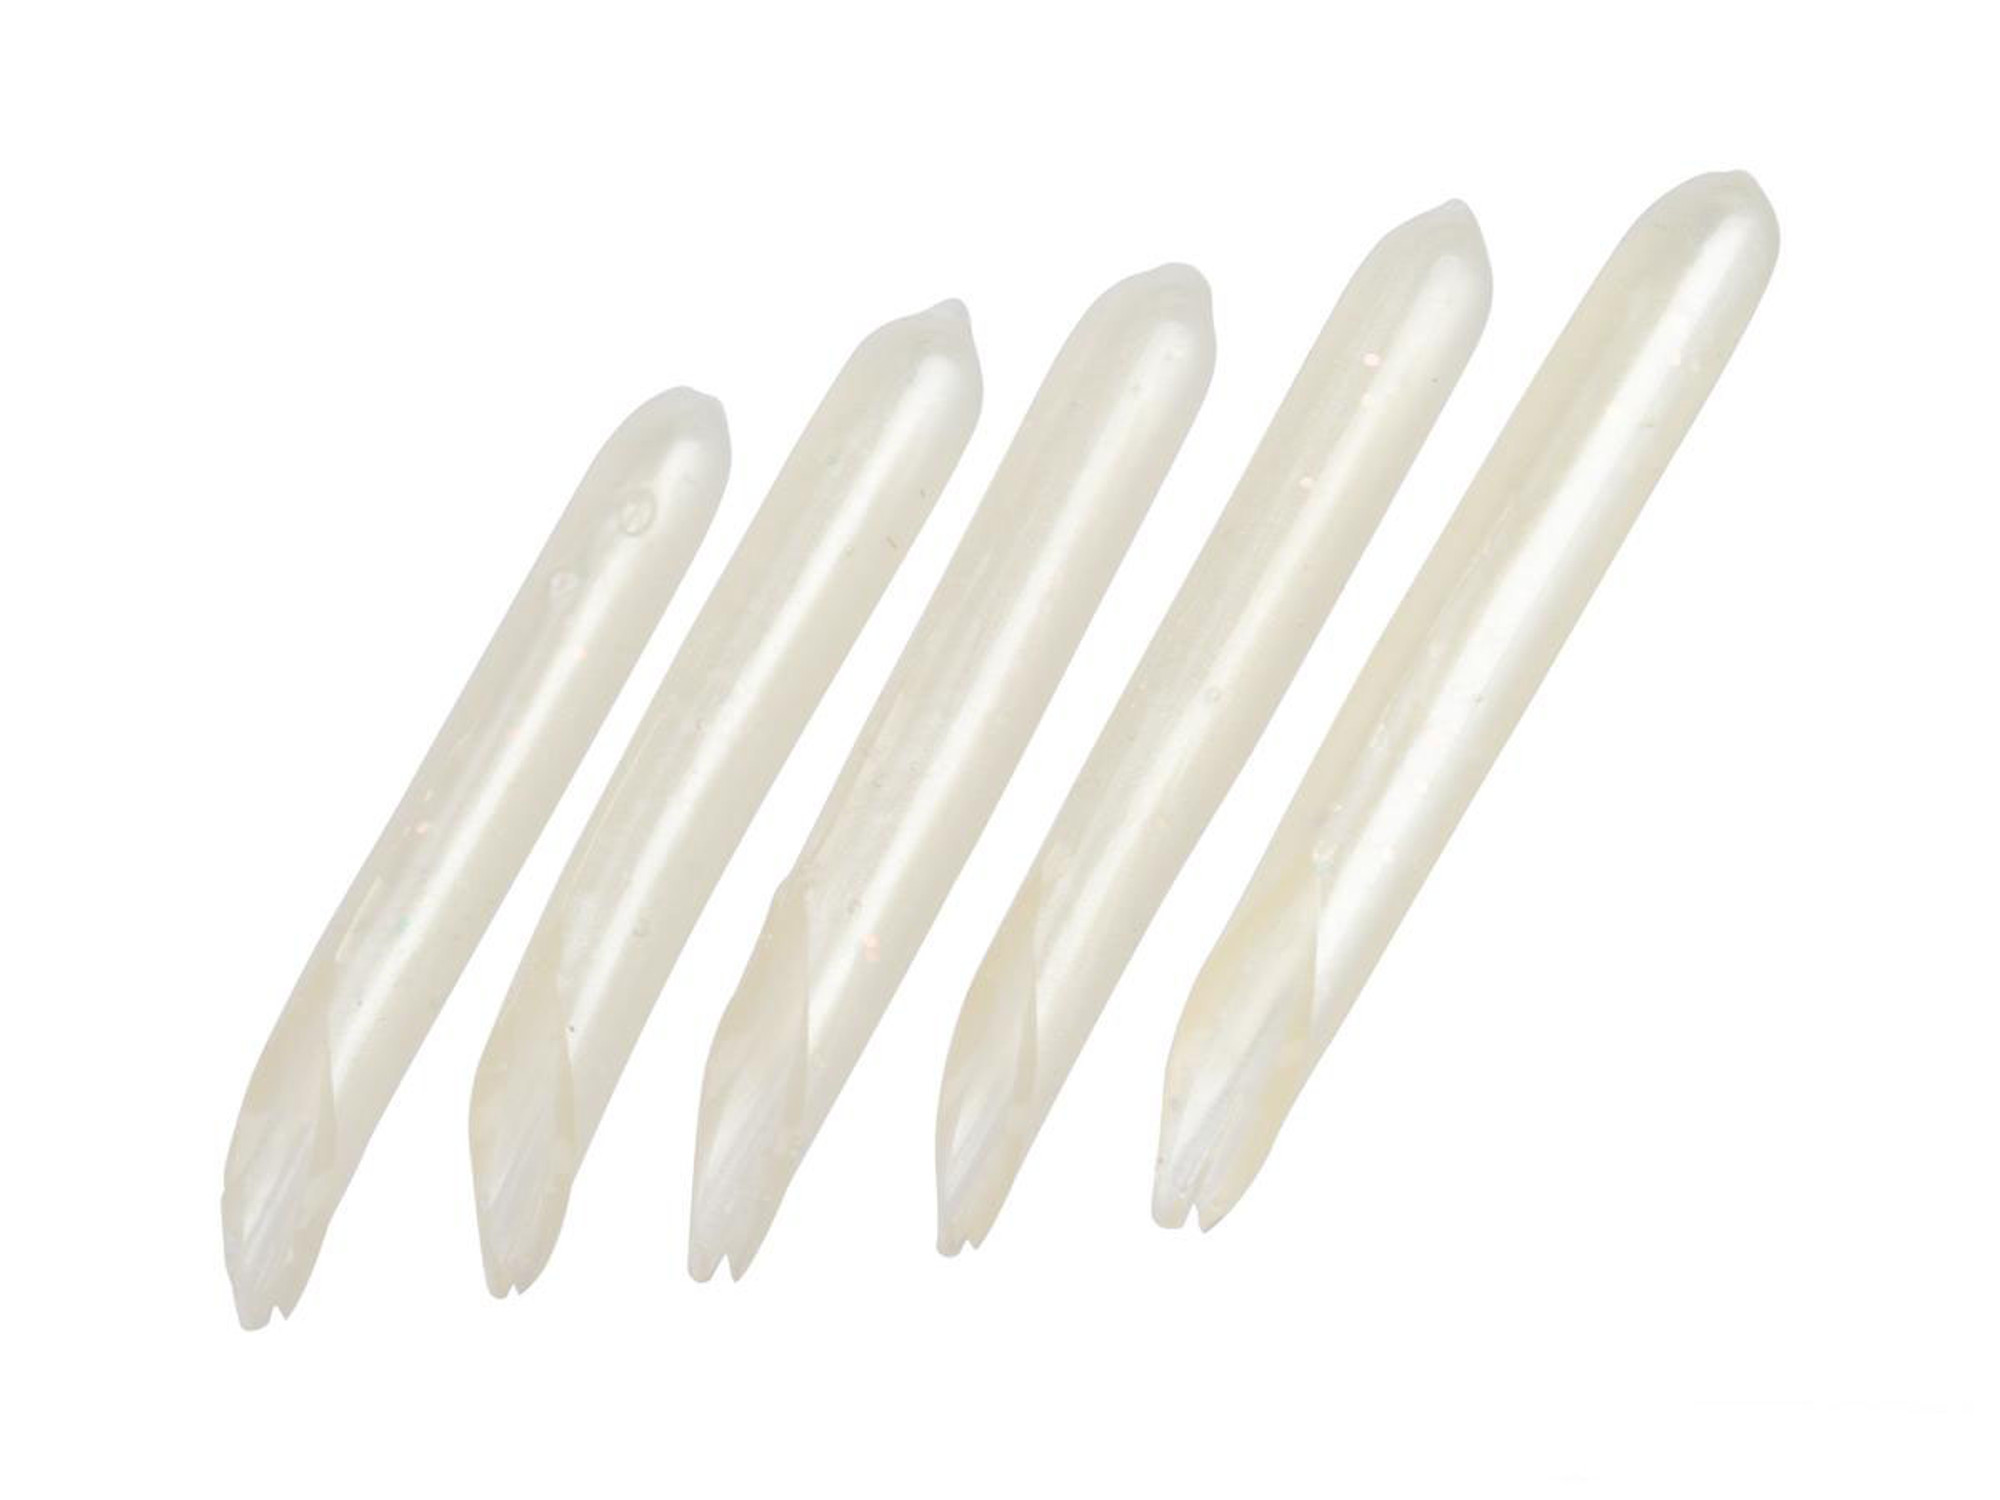 Hook Up Baits Hand Crafted Replacement Bodies for Jigs (Color: Pearl White / Medium)